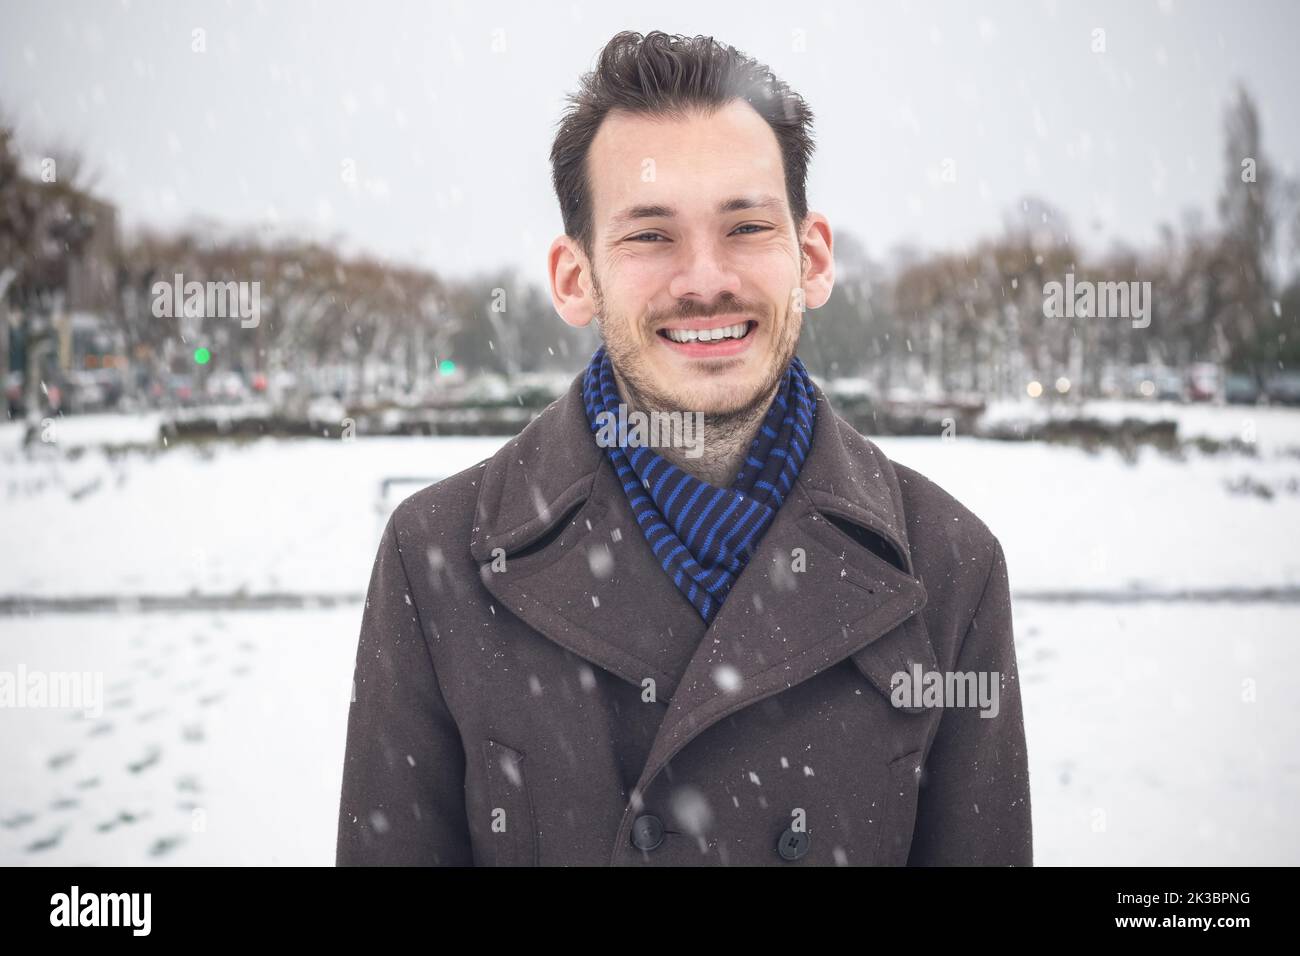 Portrait of young handsome man with beard smiling laughing looking at camera in winter snow Stock Photo